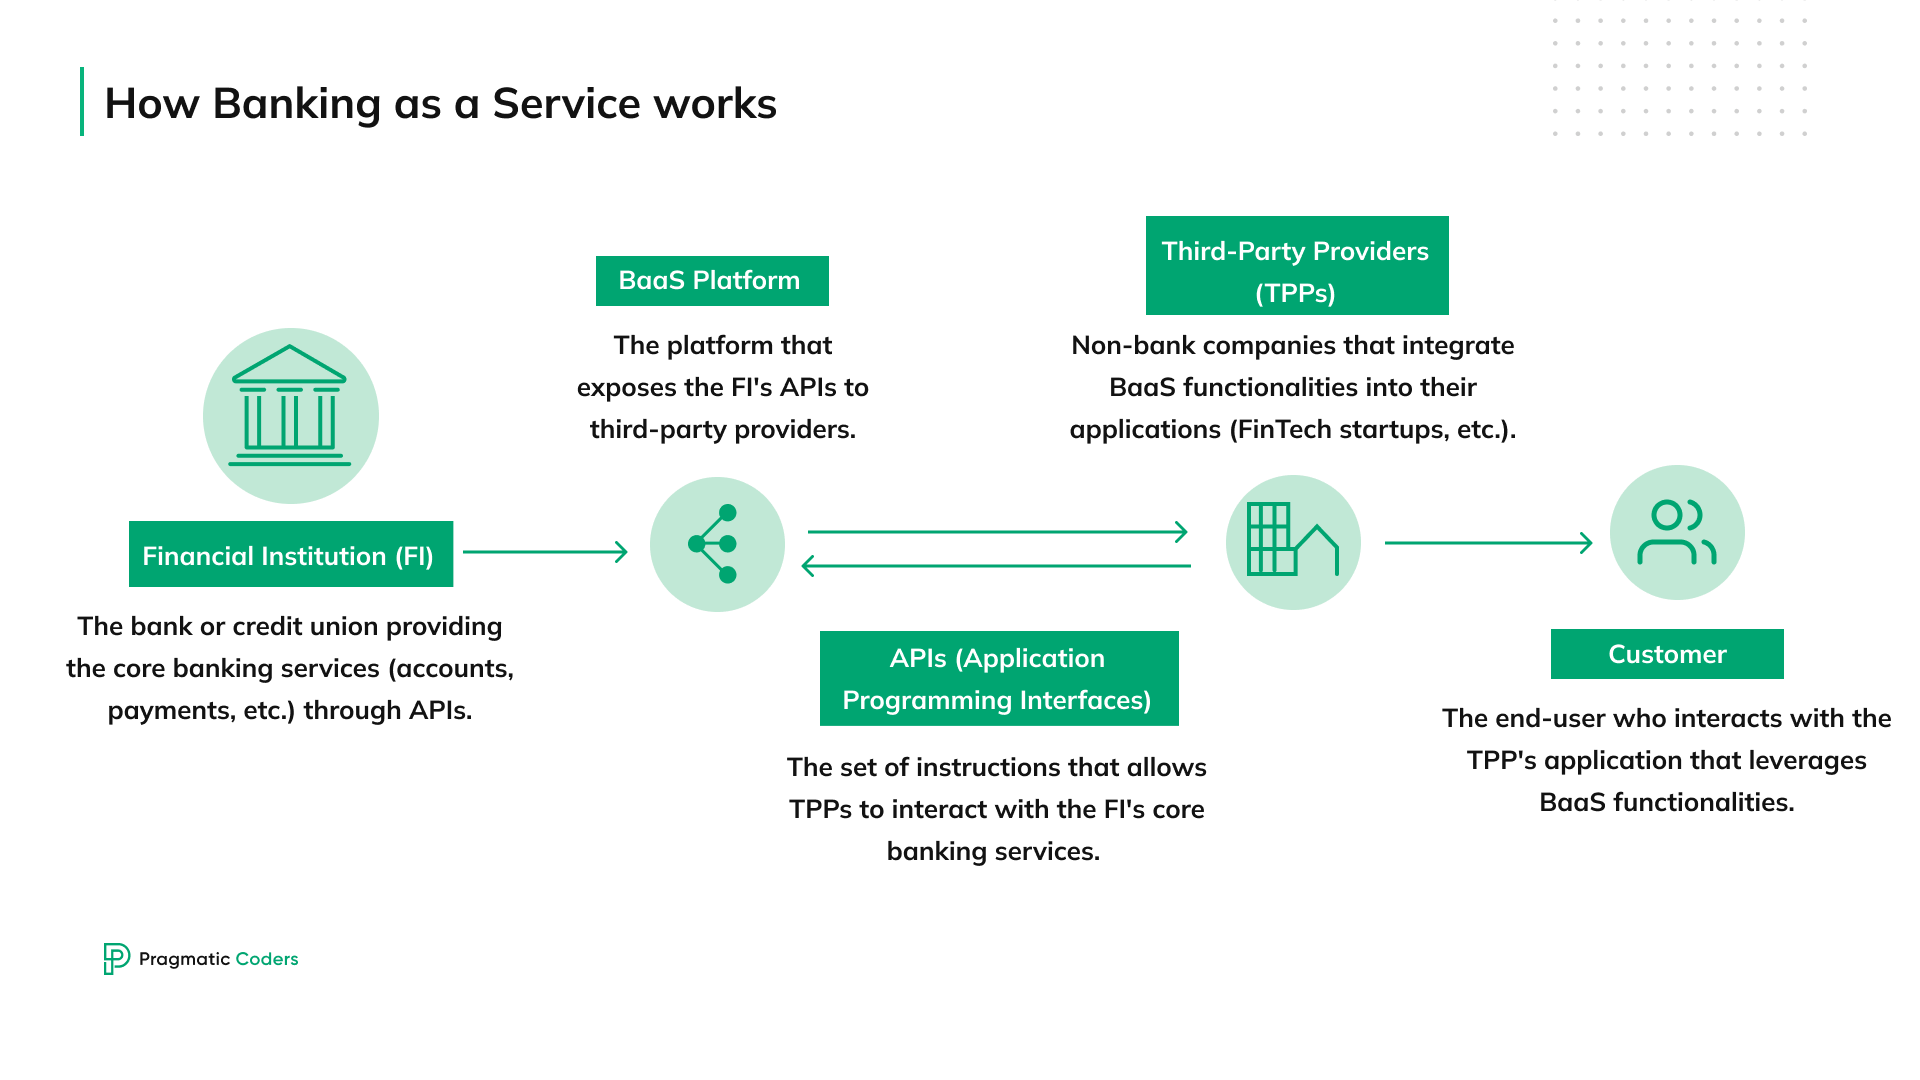 This is How Banking as a Service works